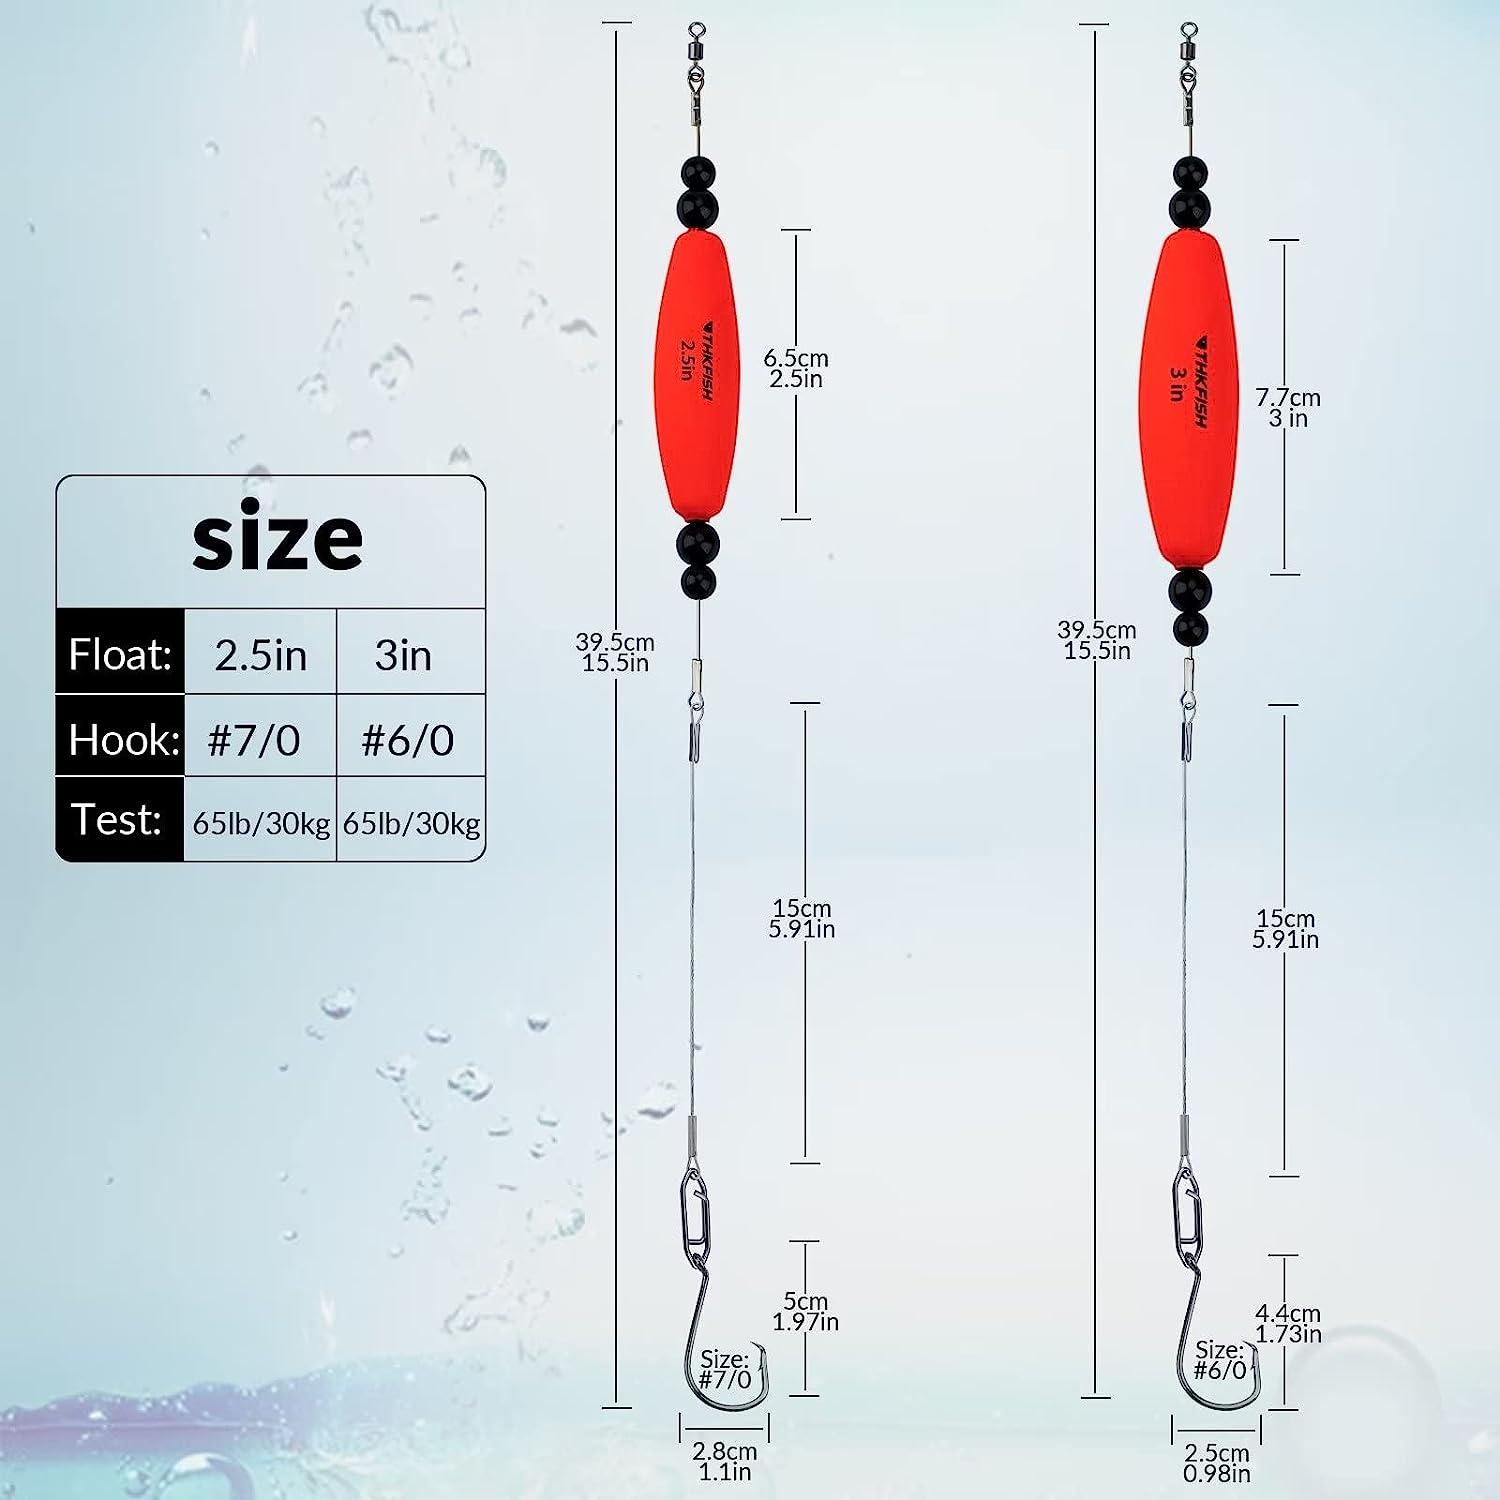 THKFISH Fishing Bobbers Catfish Float Rigs Santee Rig for Catfishing Tackle  Rattling Cork EVA Foam Peg Floats Bait Rigs 4PCS 2.5in 3in 2.5 RED